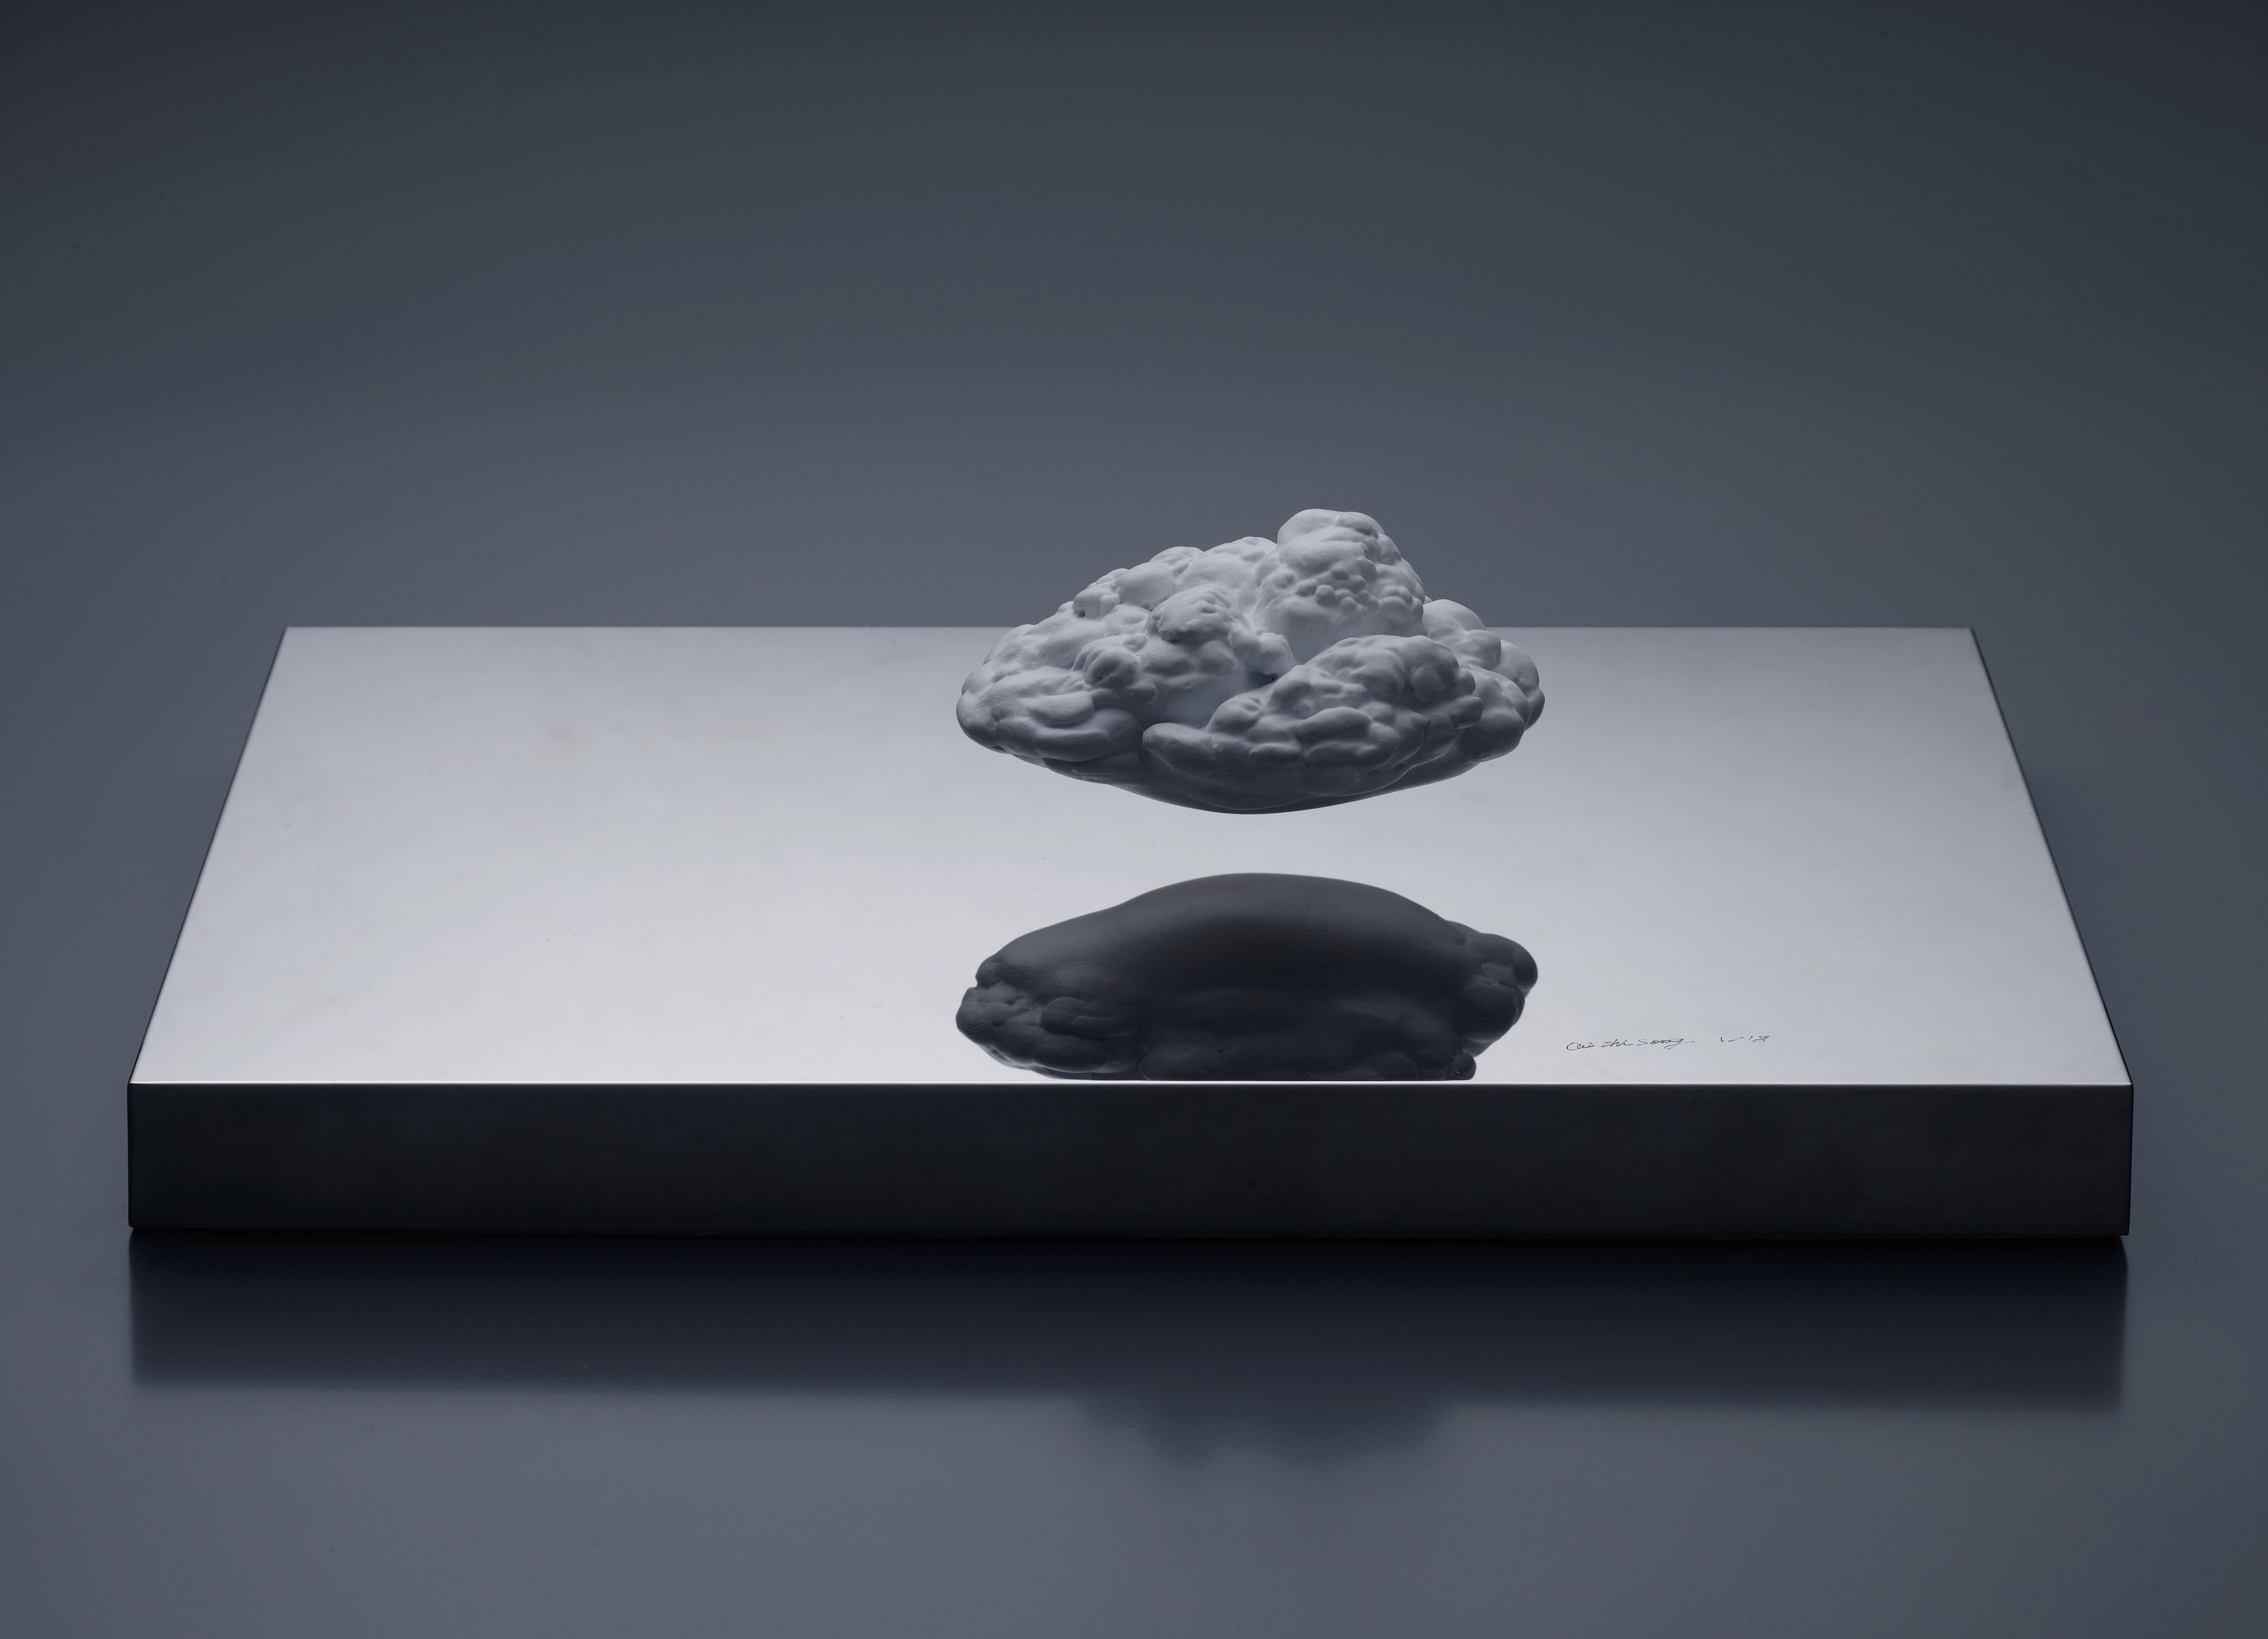 Artist name: Cai Zhisong
Title: Magnetic Suspension Cloud
Stand Size: 38 x 25 x 3cm / Cloud Size: 13 x 10 x 7cm
Medium: Resin Cloud & Stainless Steel Stand & Magnetic Suspension
Signature: Artist Hand-Sign on the work
Limited Edition: 18

About